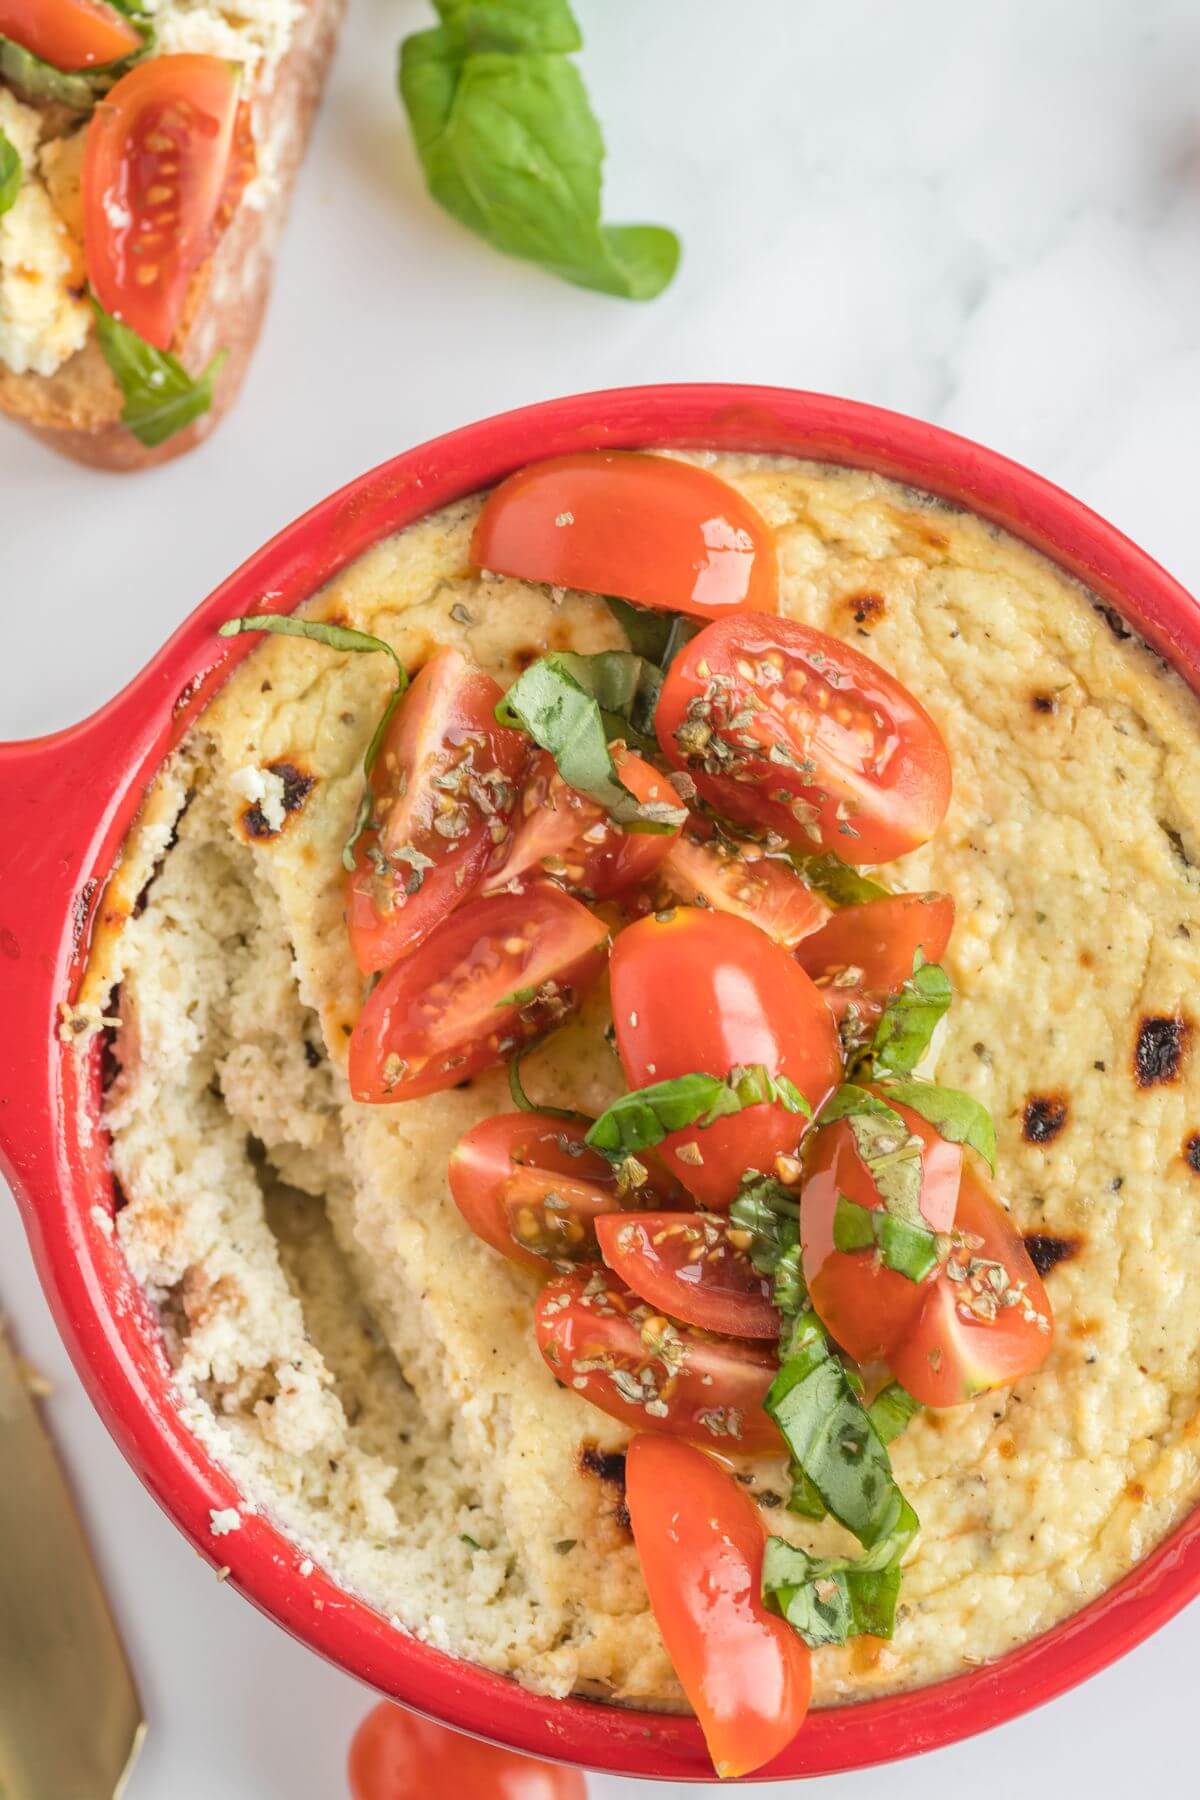 Cherry tomato slices and basil shreds are on top of cheese dip in a red dish.